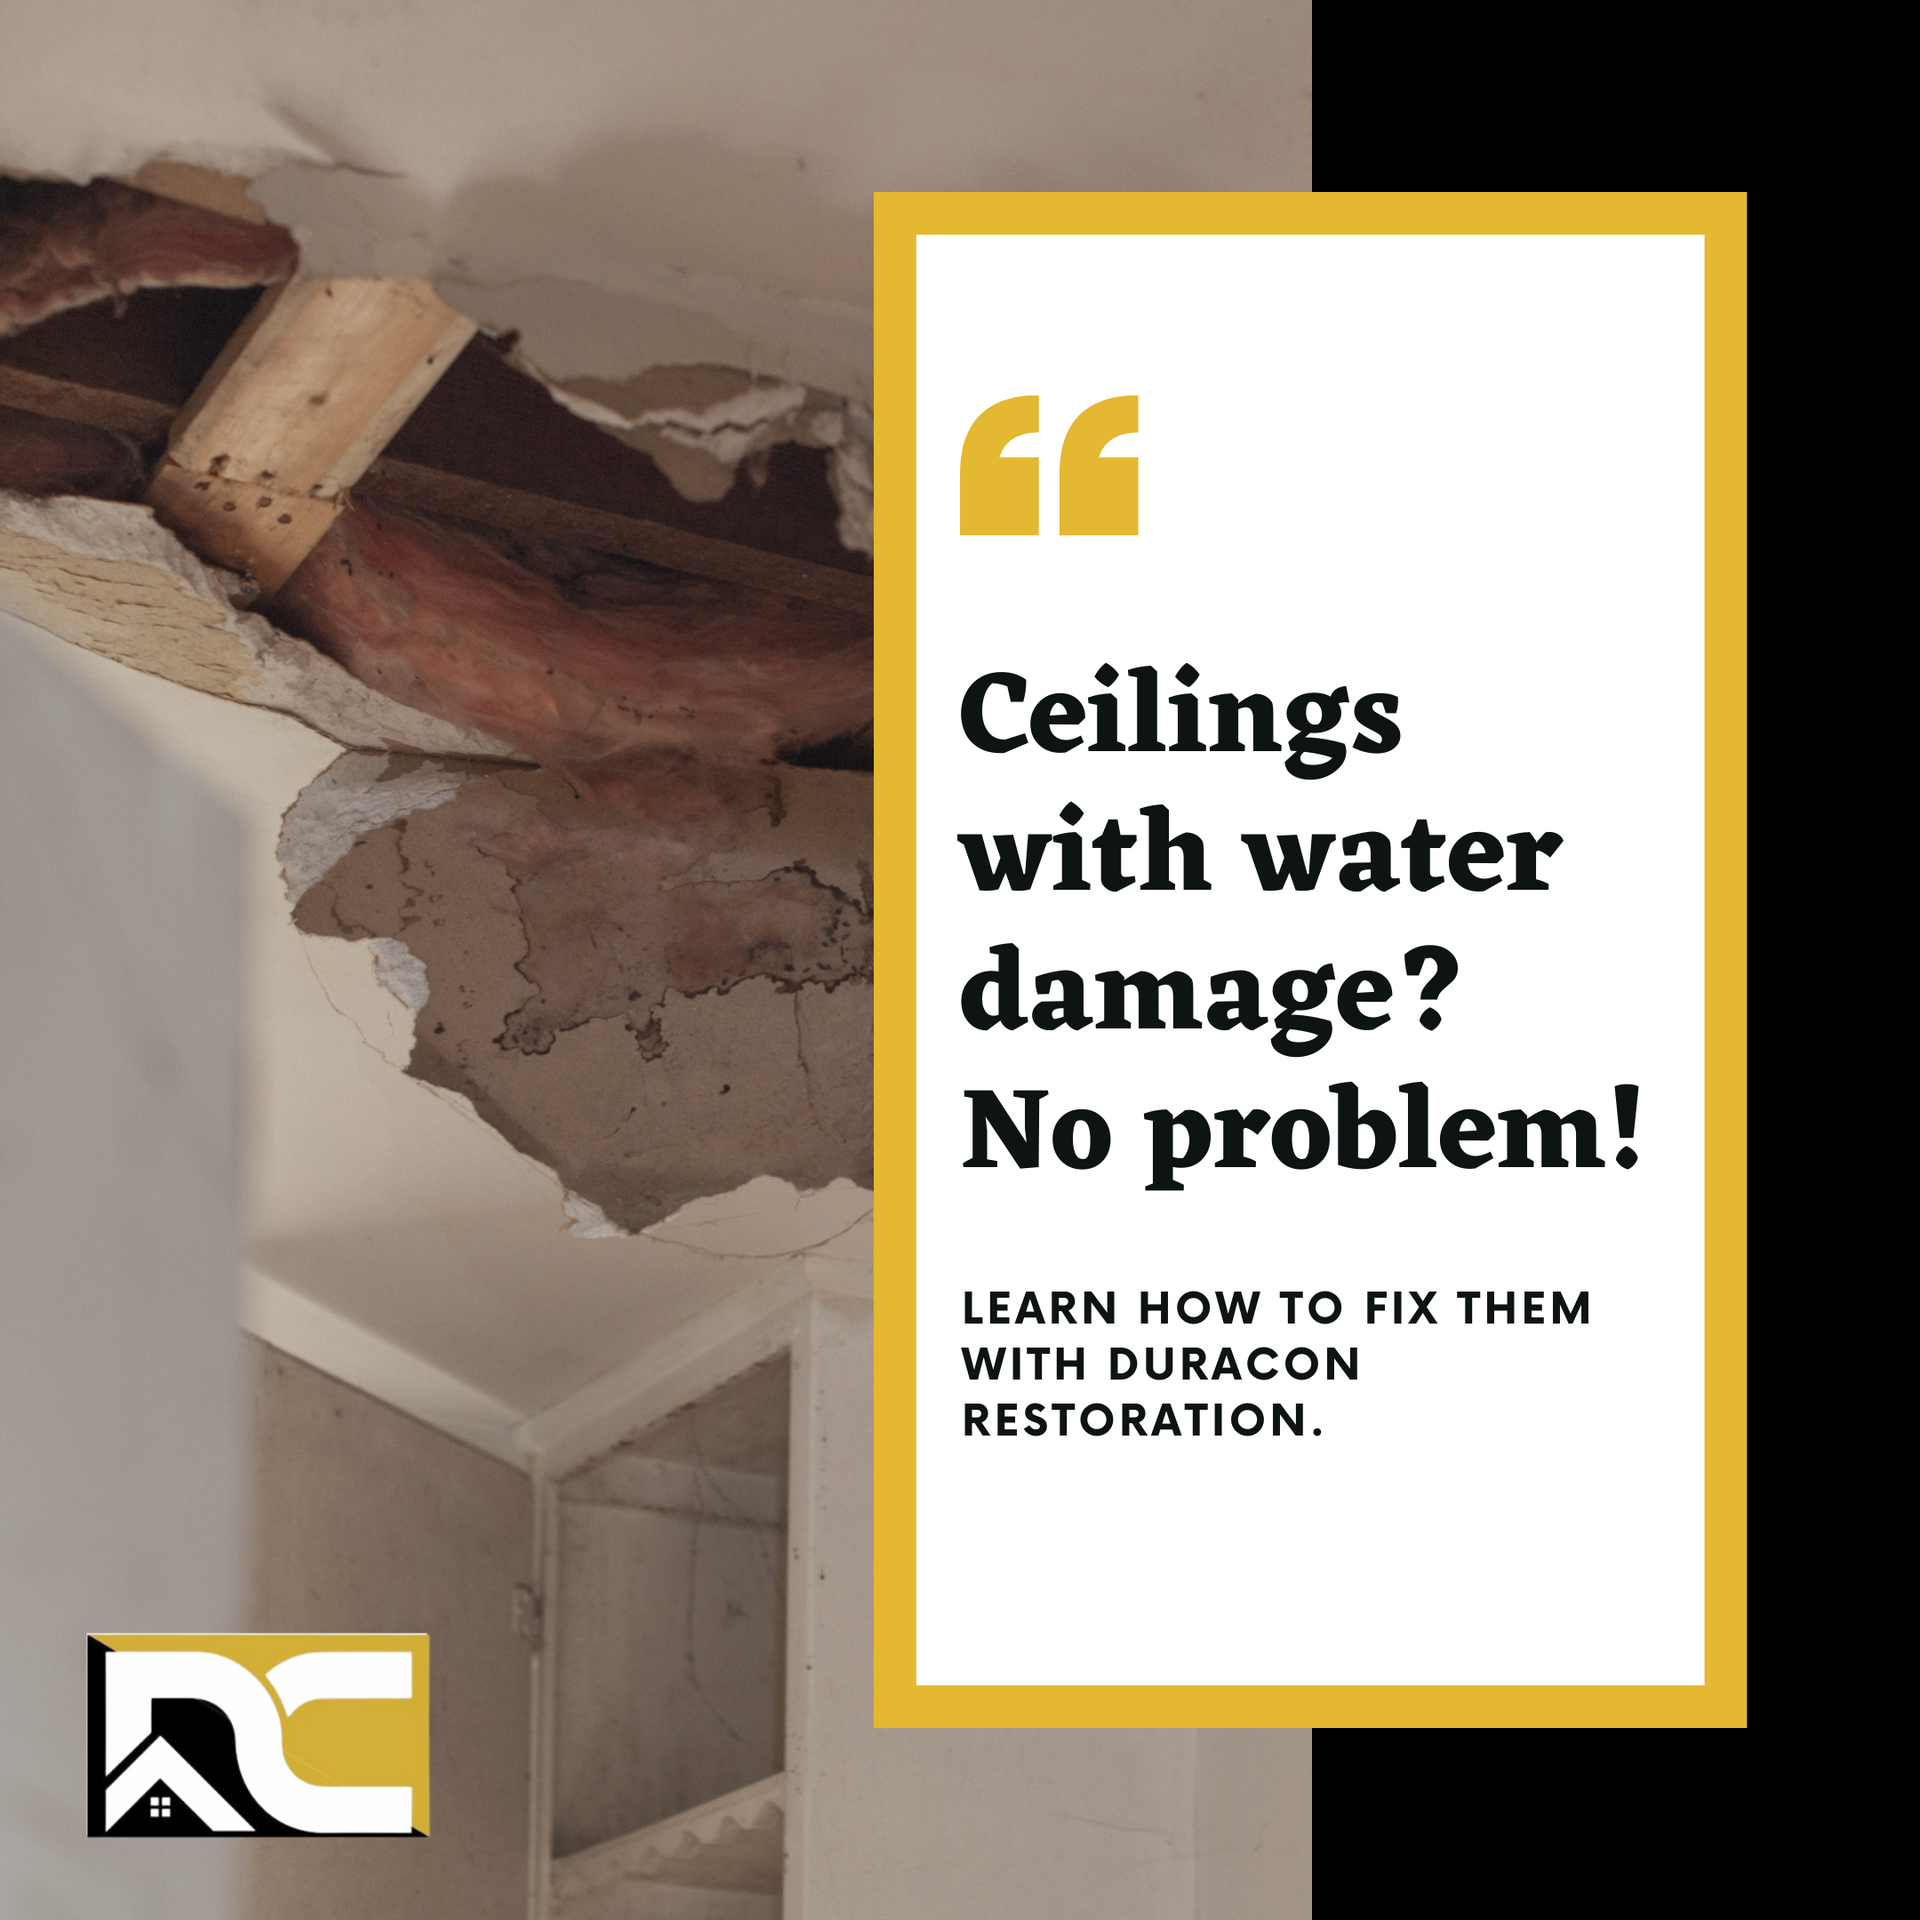 DuraCon Restoration blog on how to repair a ceiling with water damage